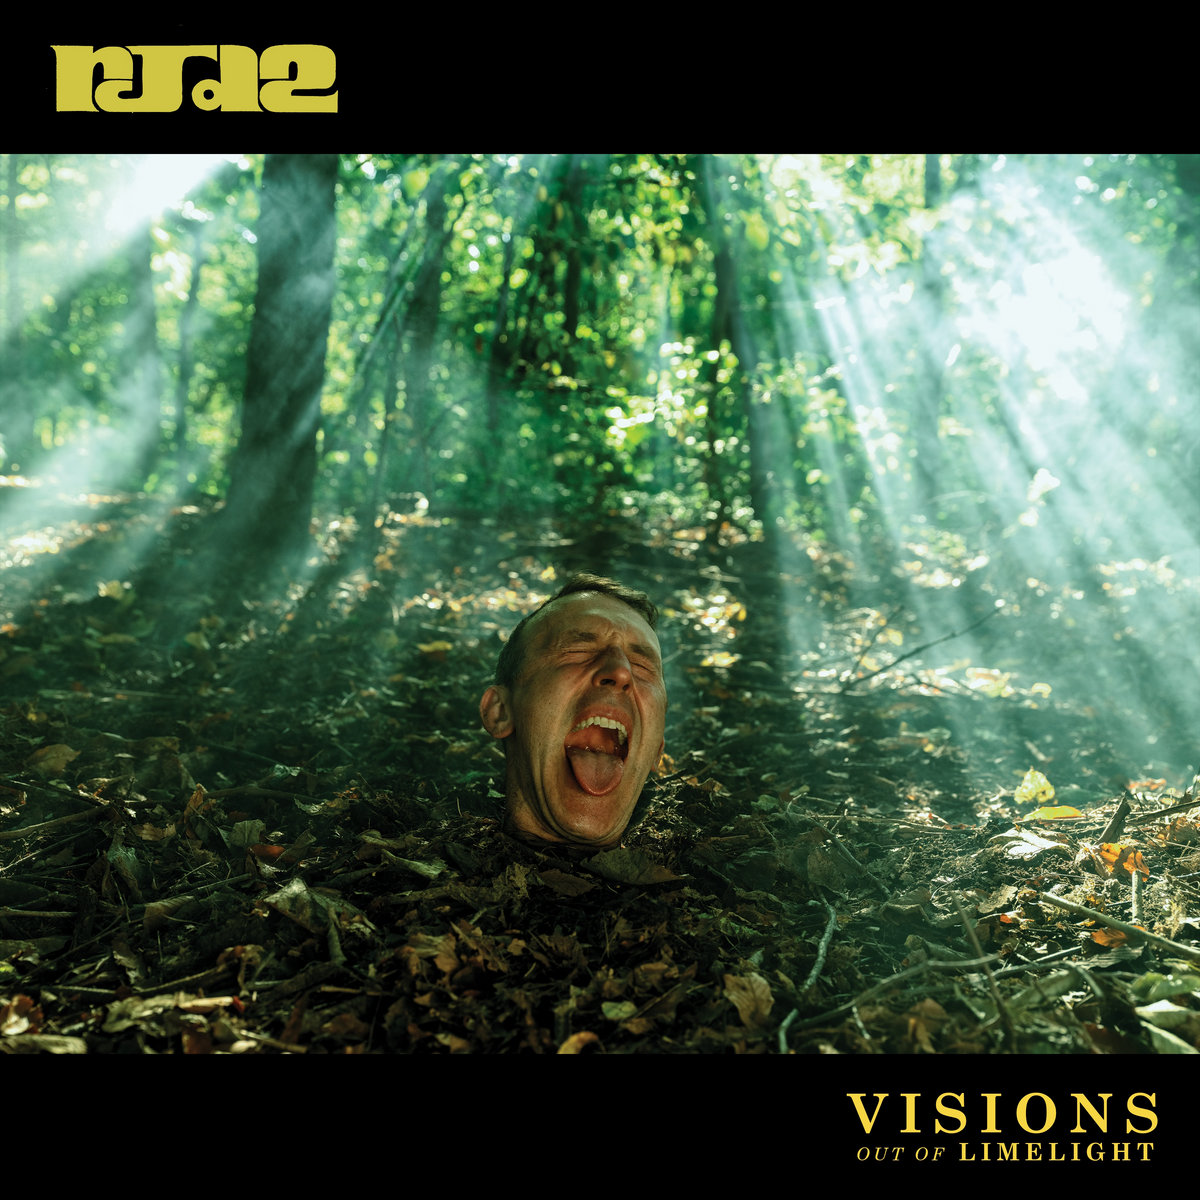 RJD2-visions